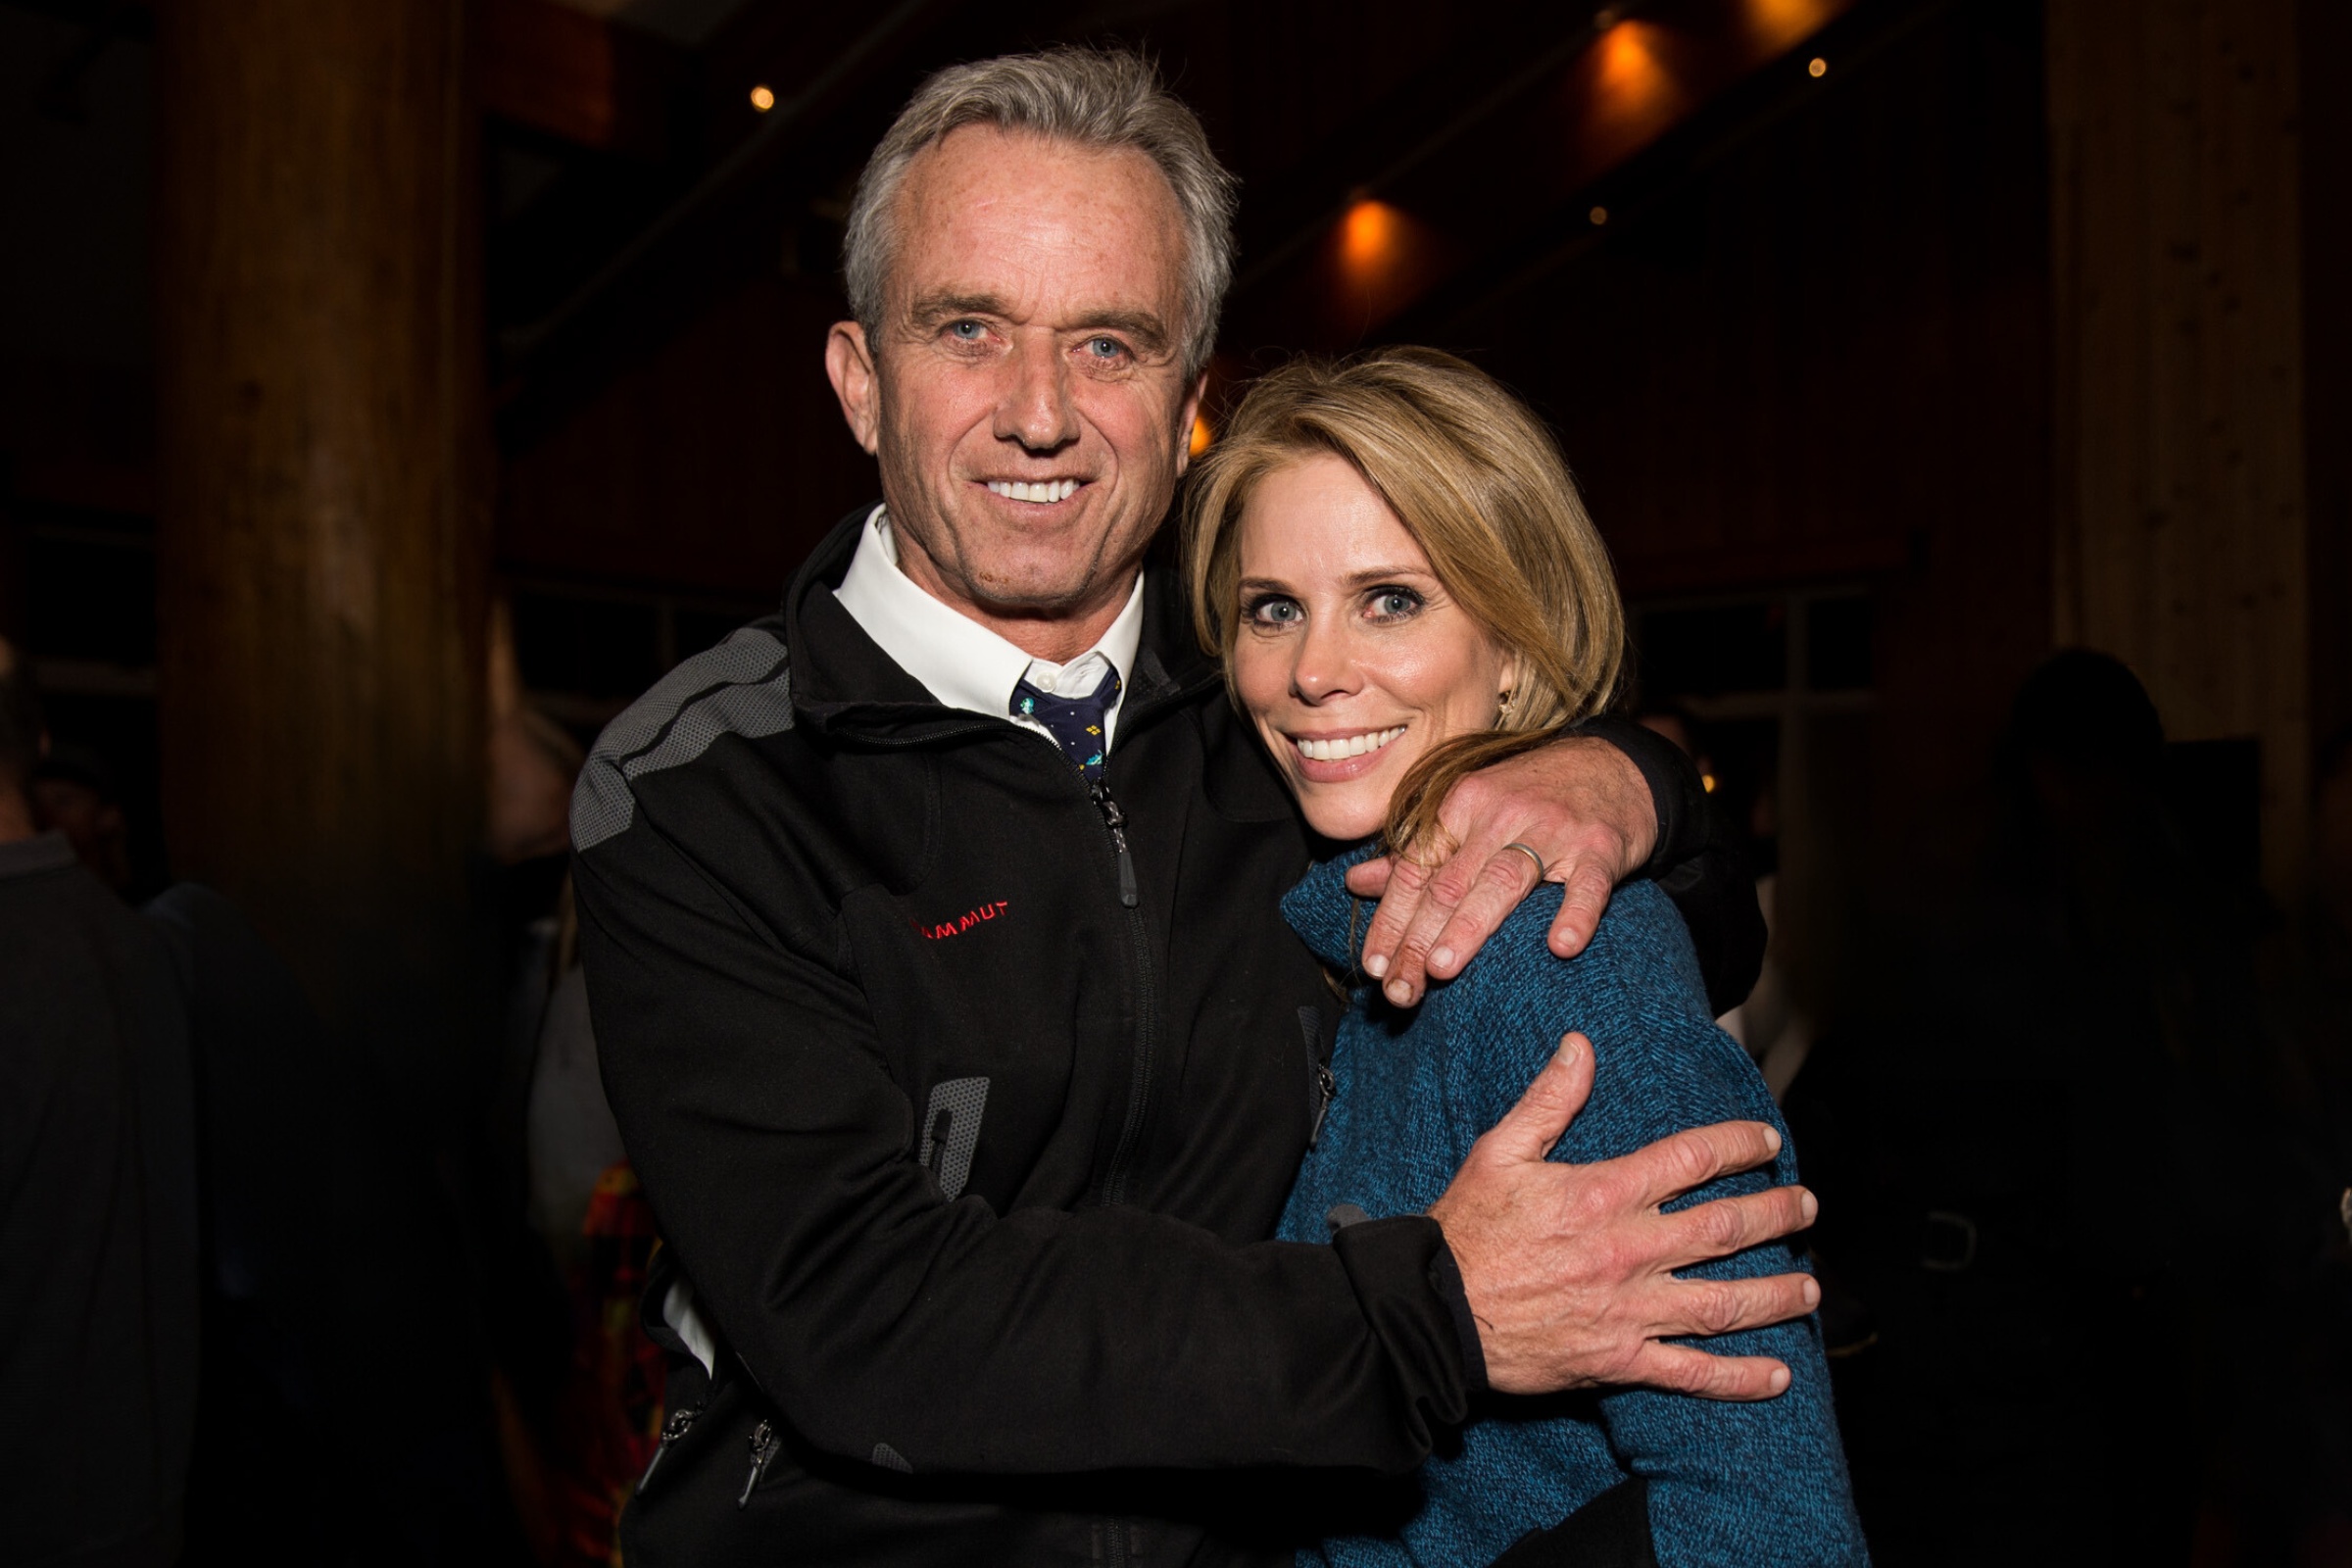 Inside RFK Jr.s Life With Curb Your Enthusiasm Star Wife Cheryl Hines photo